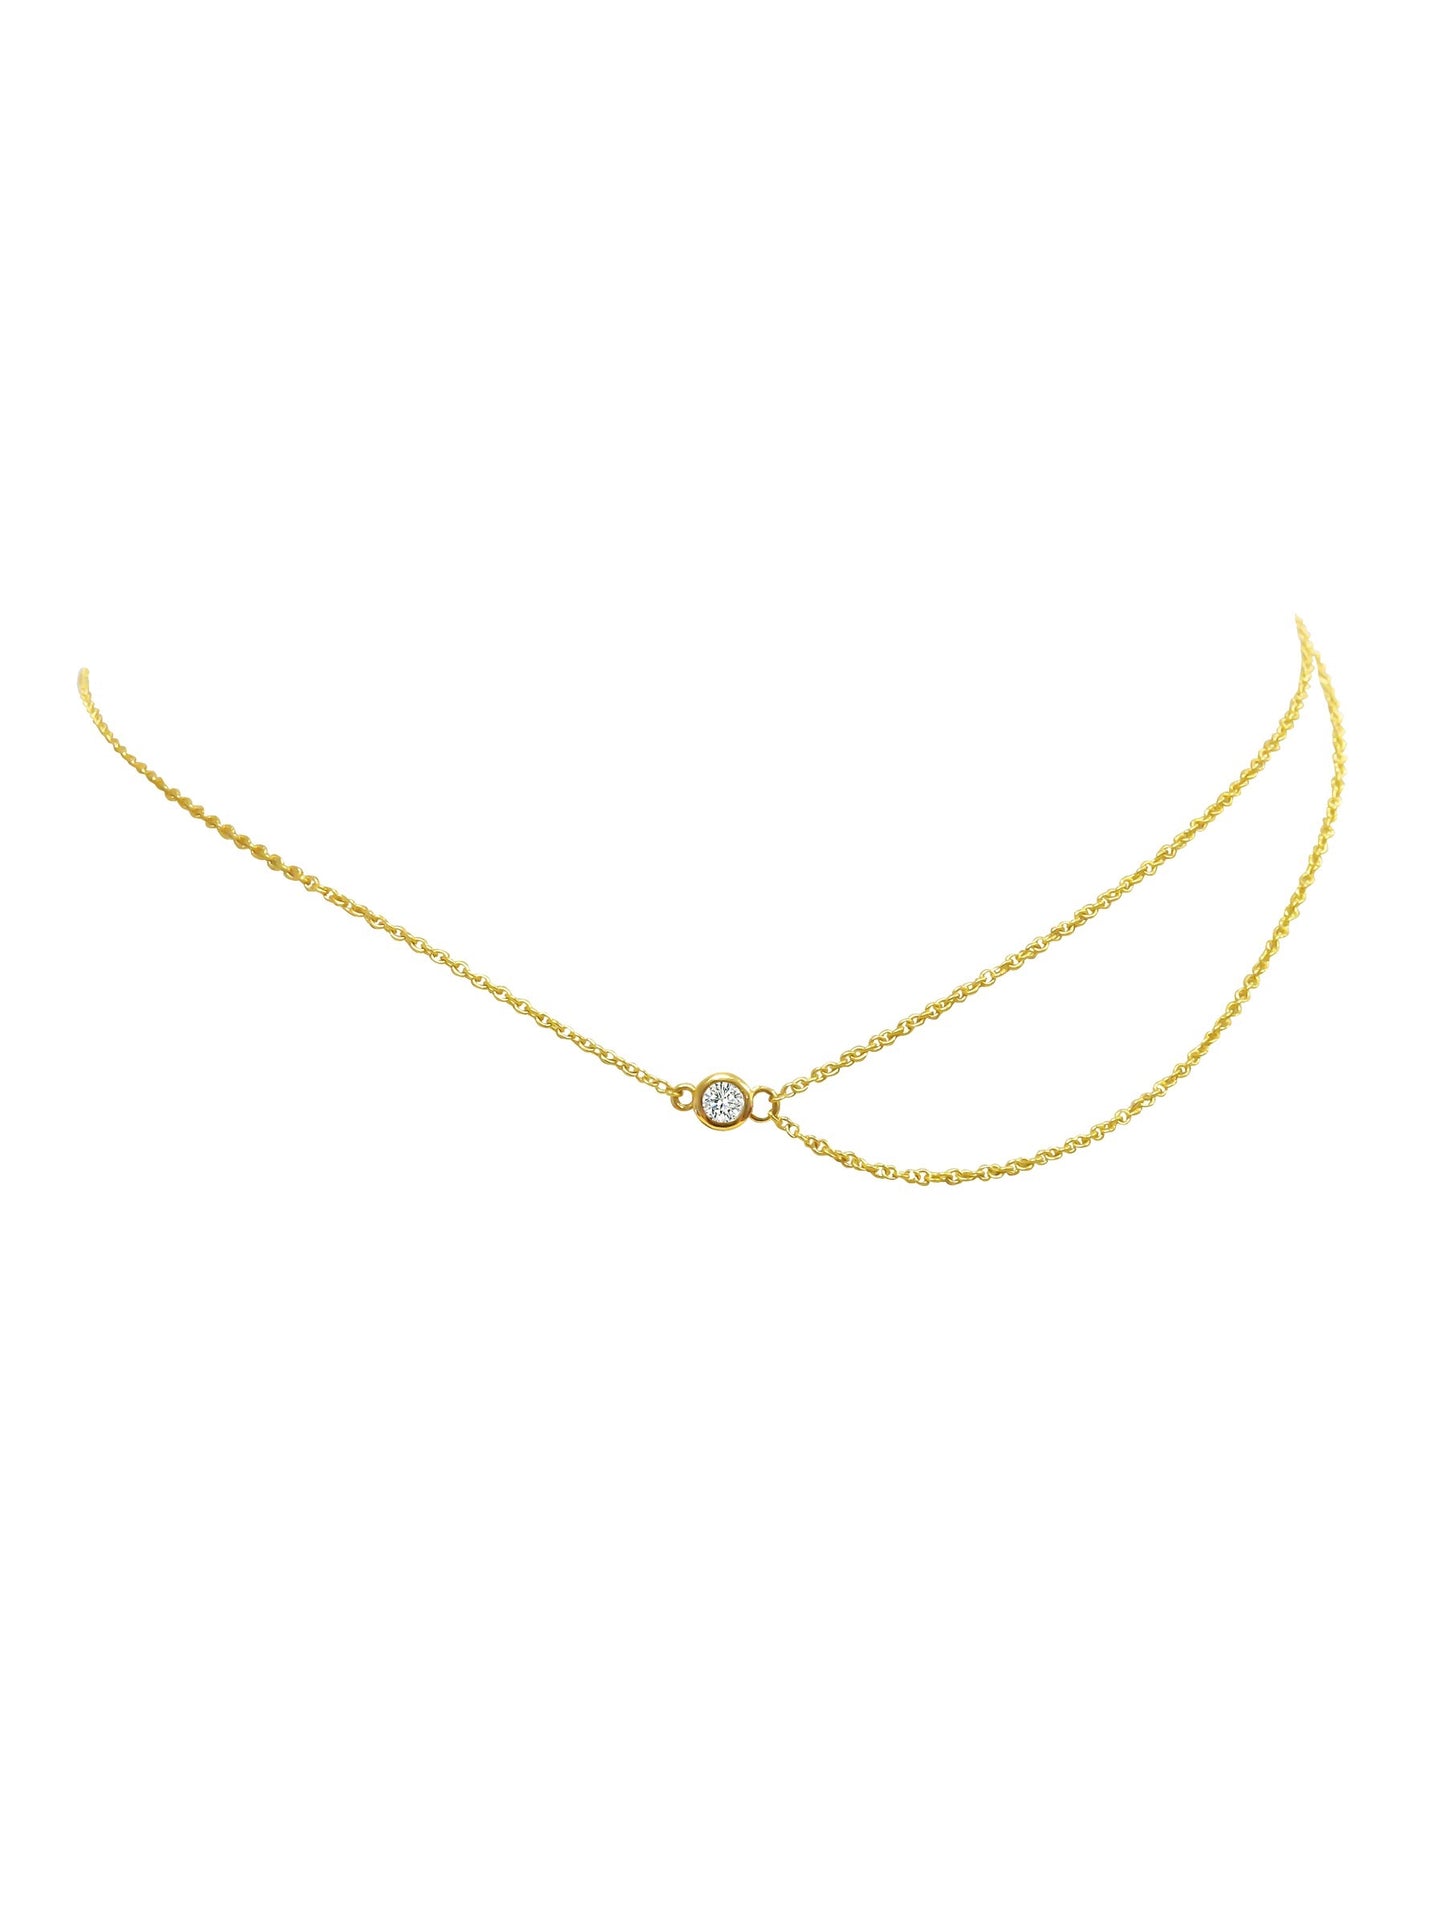 Load image into Gallery viewer, Reign - 18K Yellow Gold Single Bezel Drape Choker Necklace
